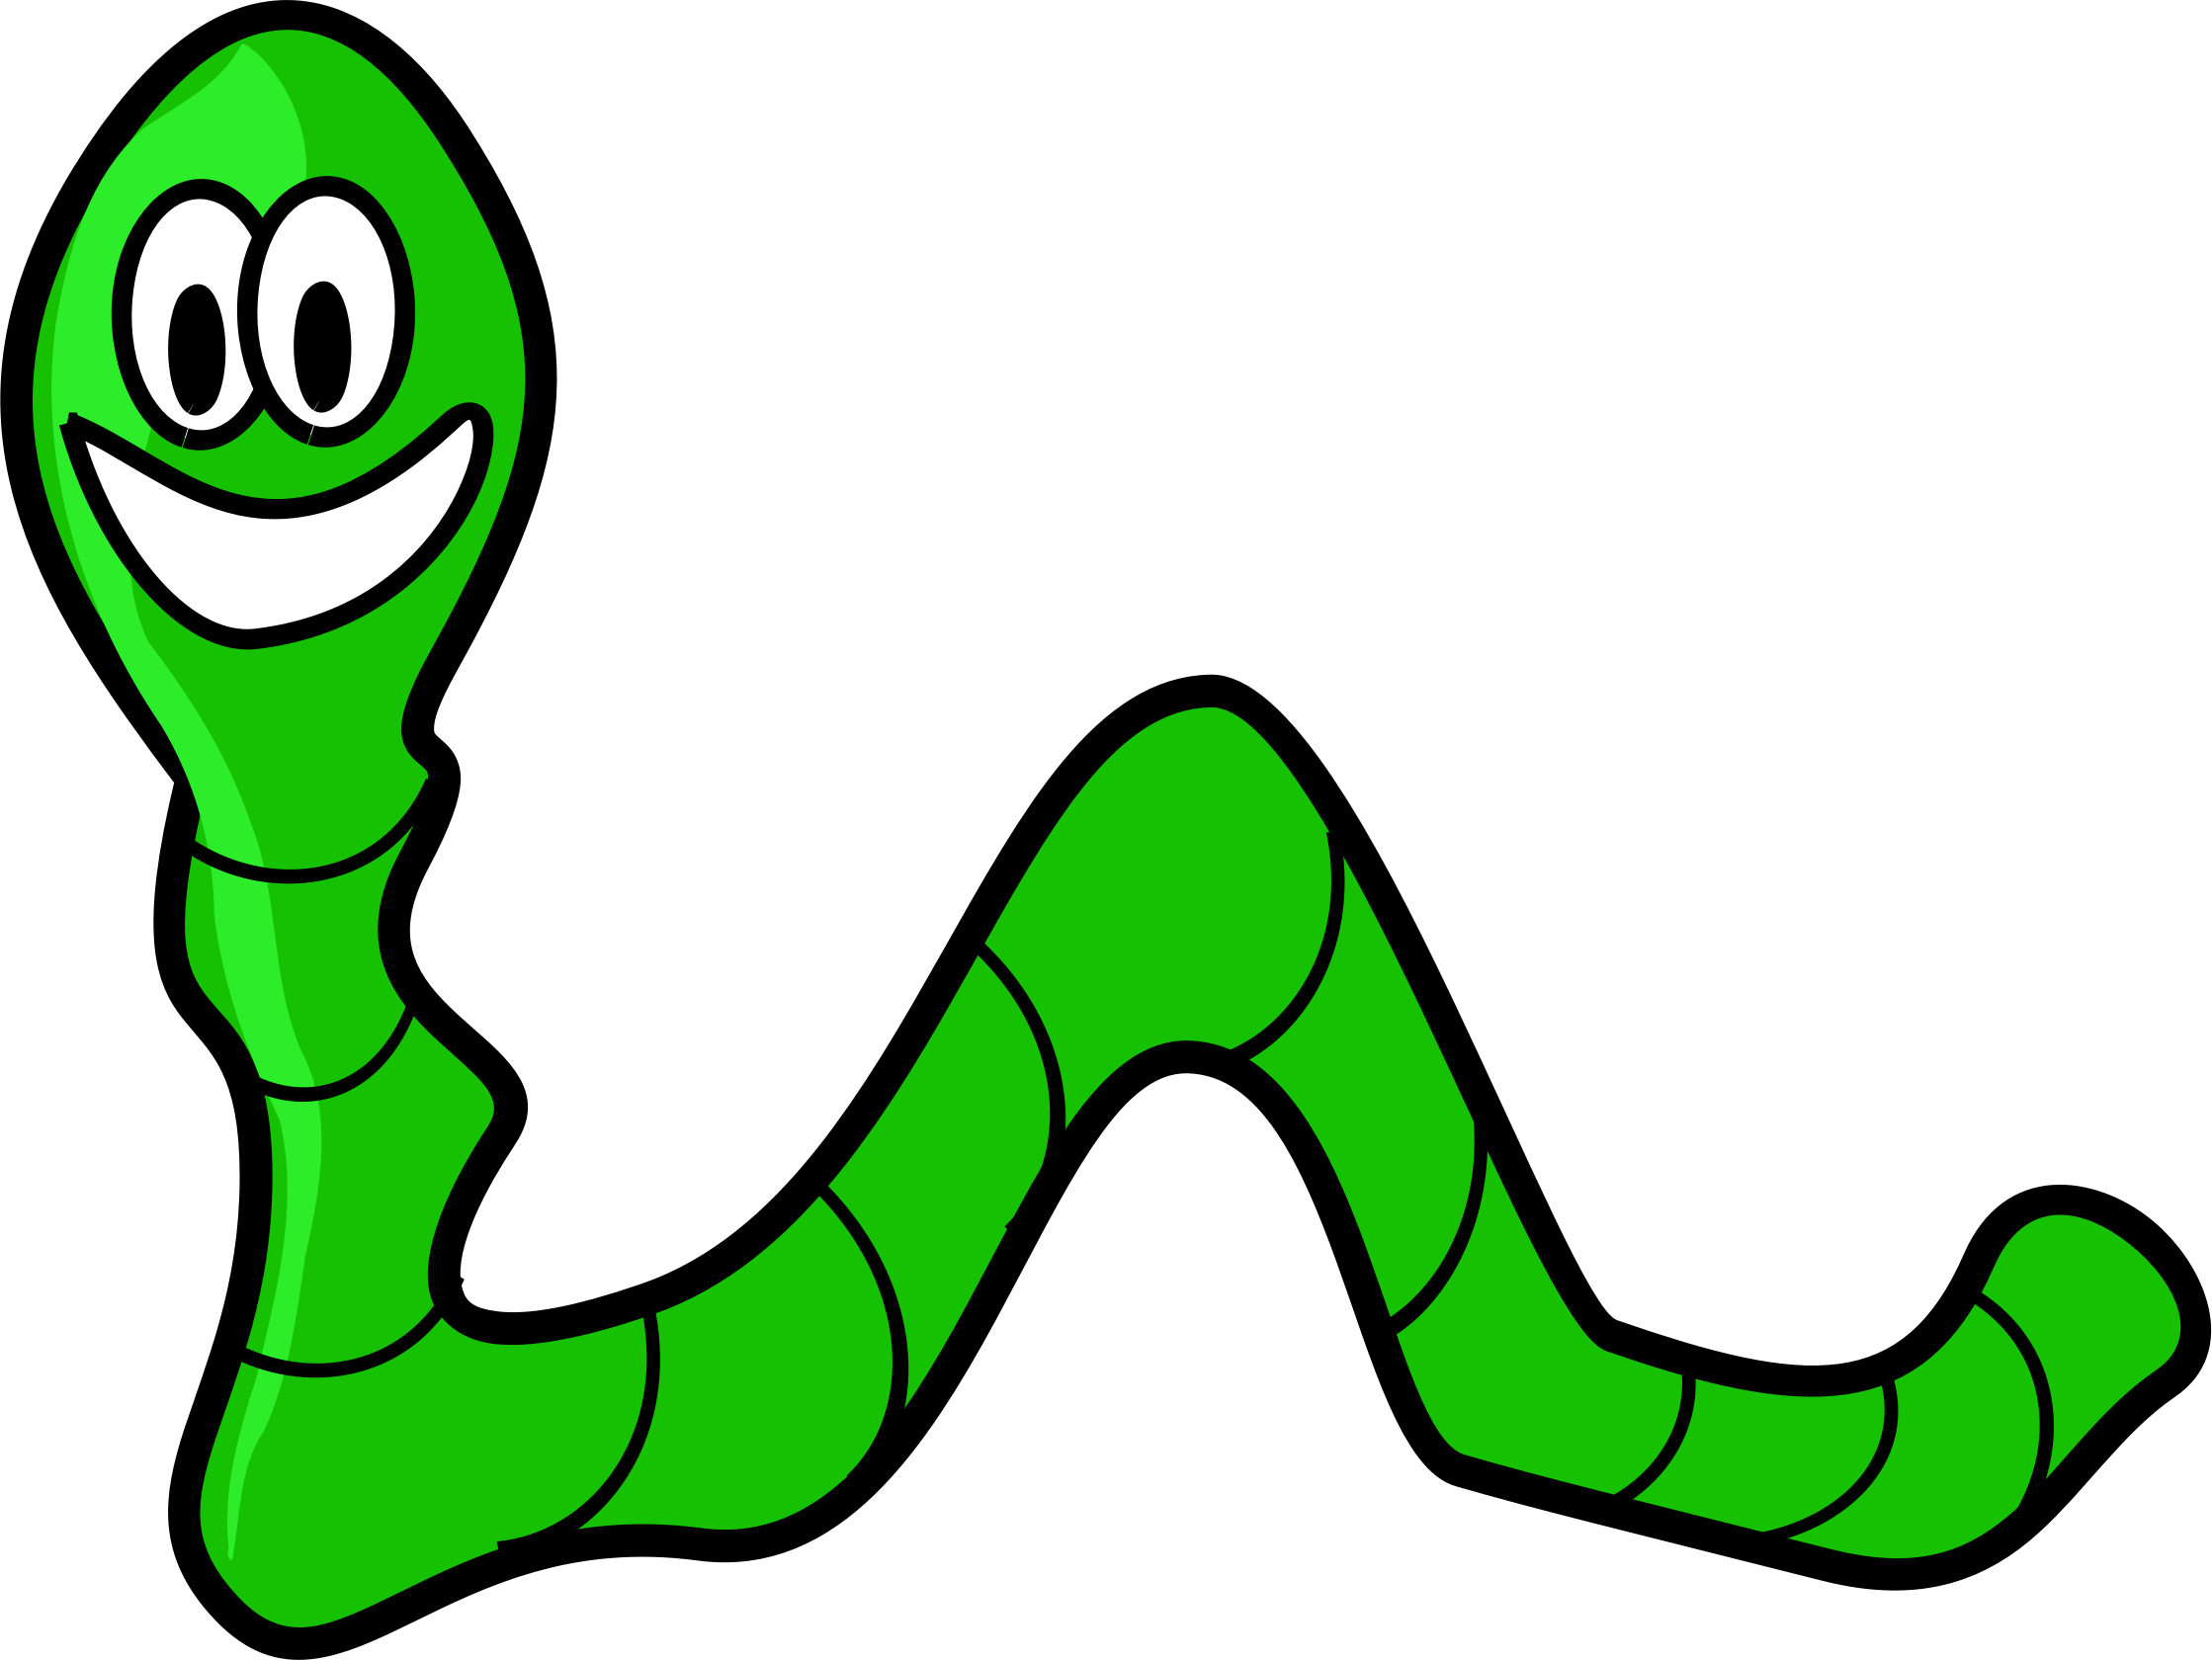 Sea Worm clipart #5, Download drawings